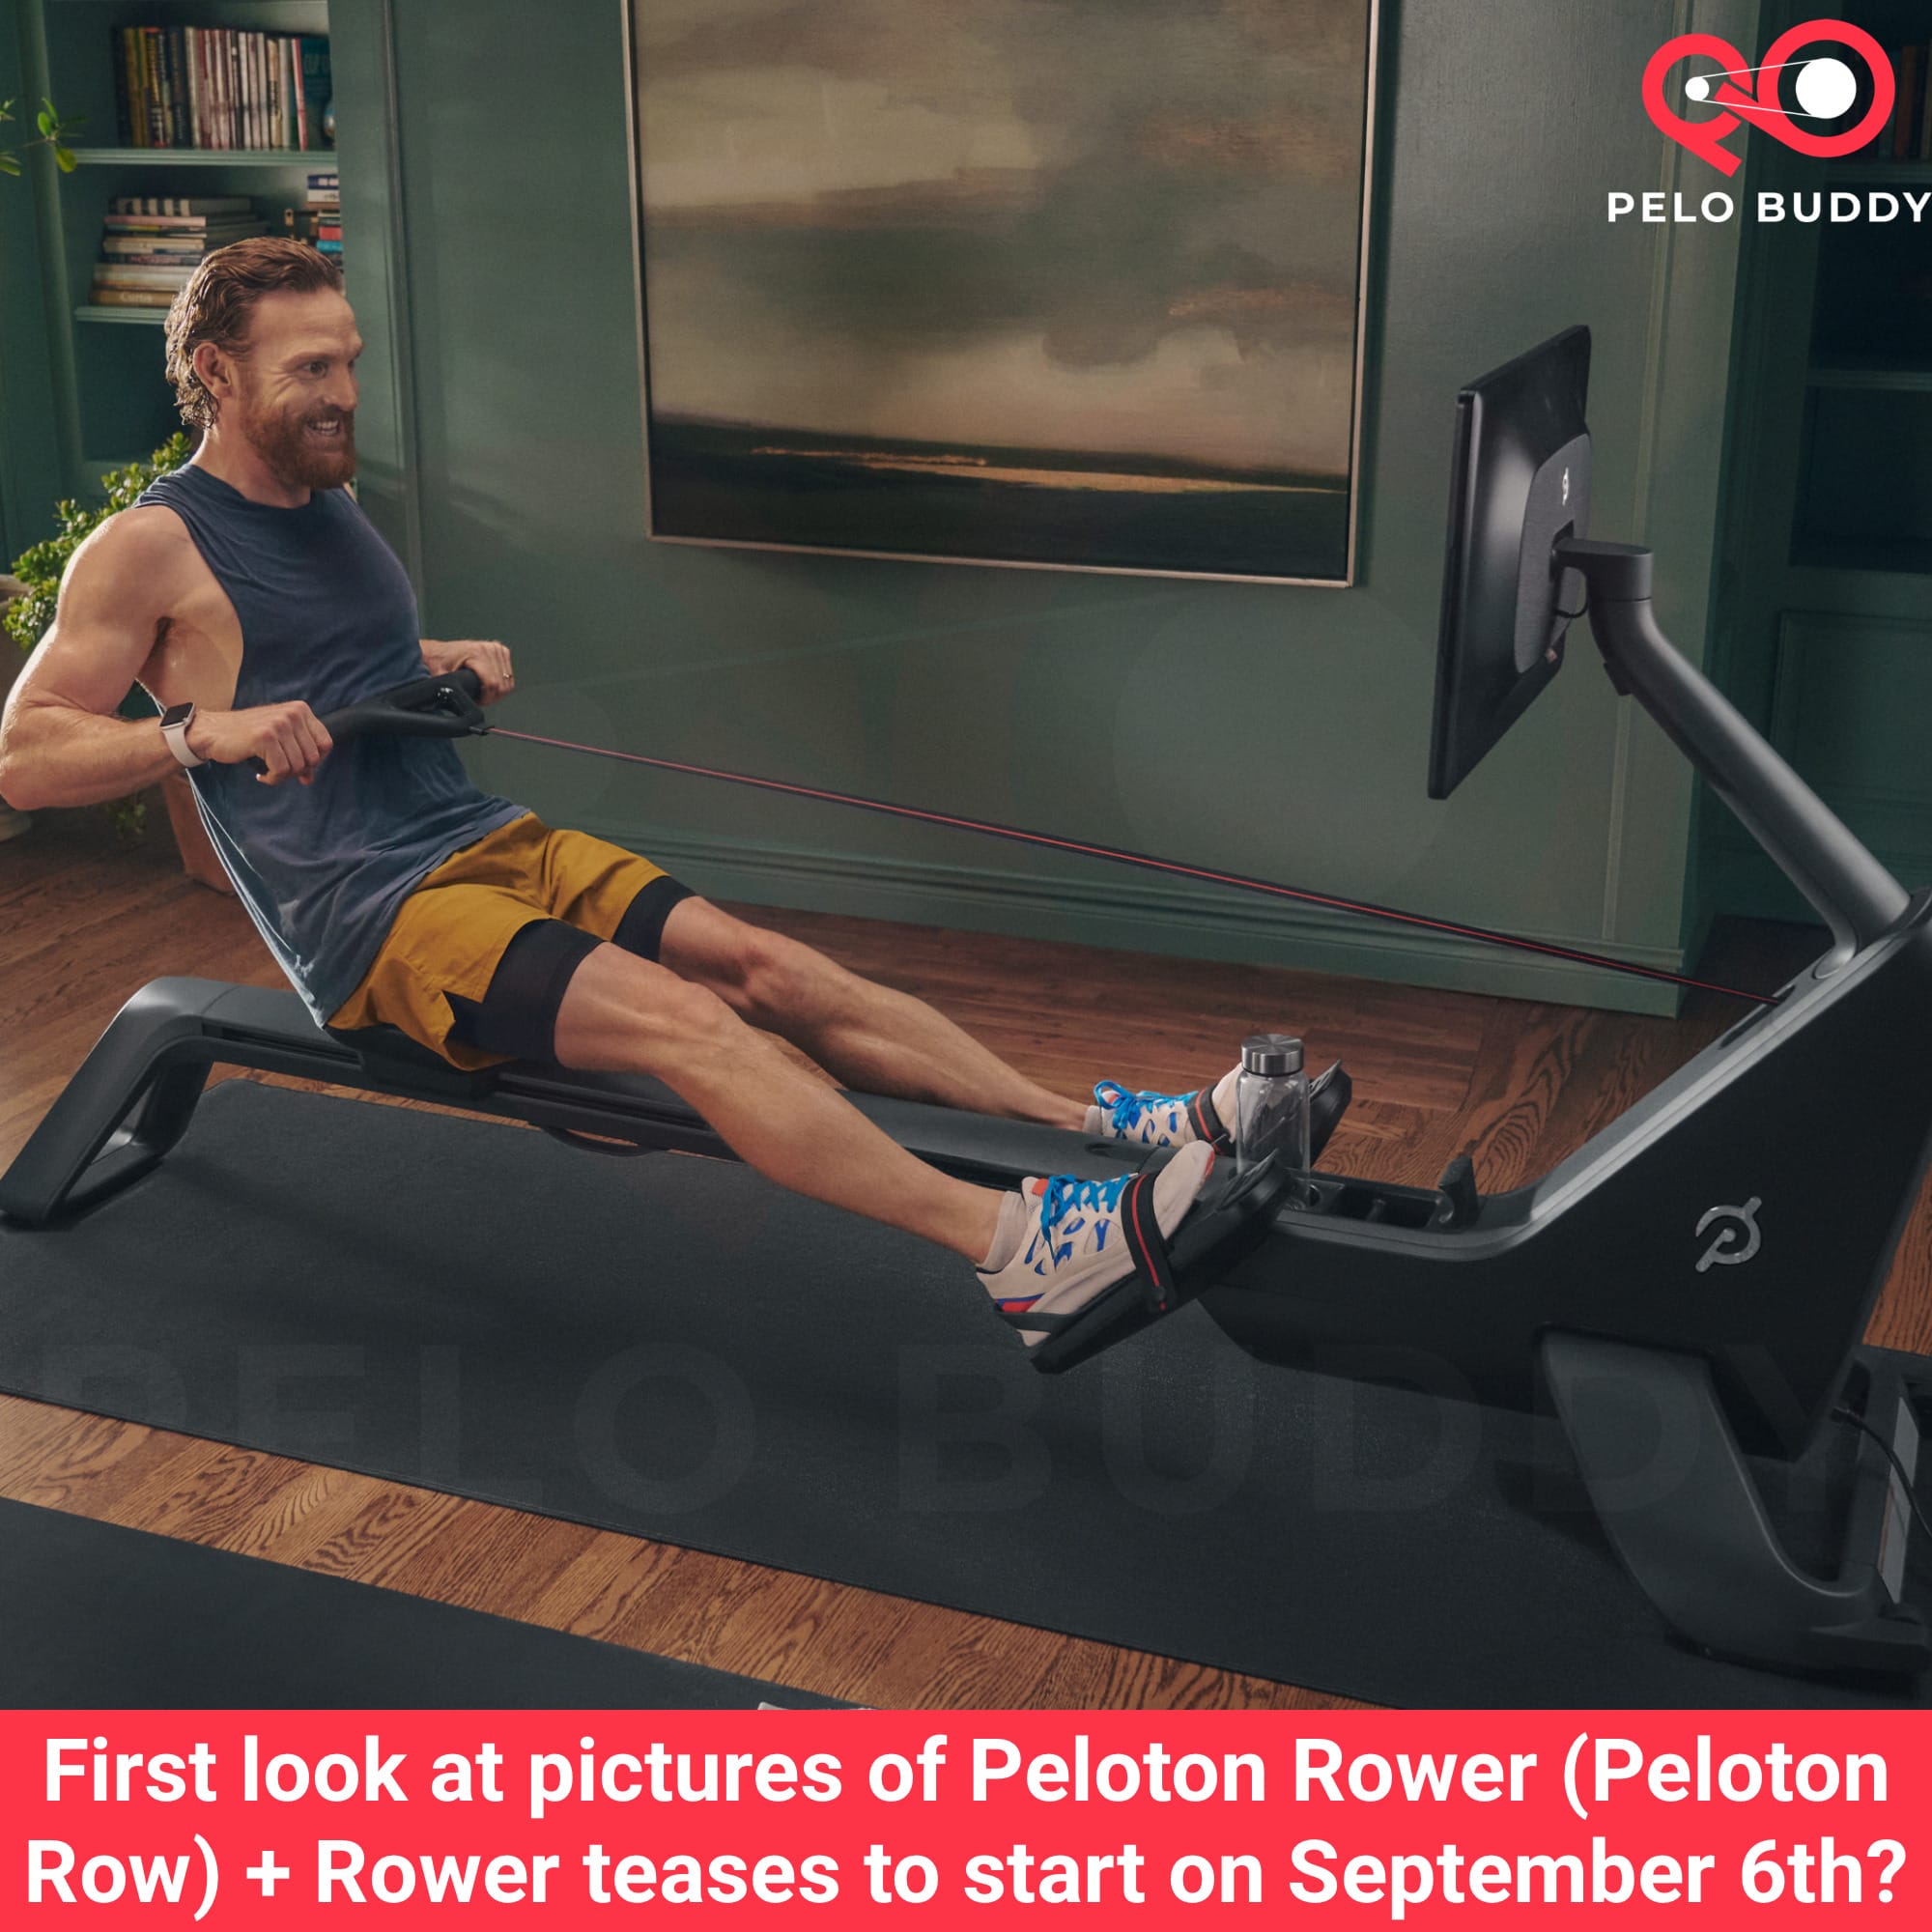 Another image showing off the new Peloton Rower (Peloton Row).